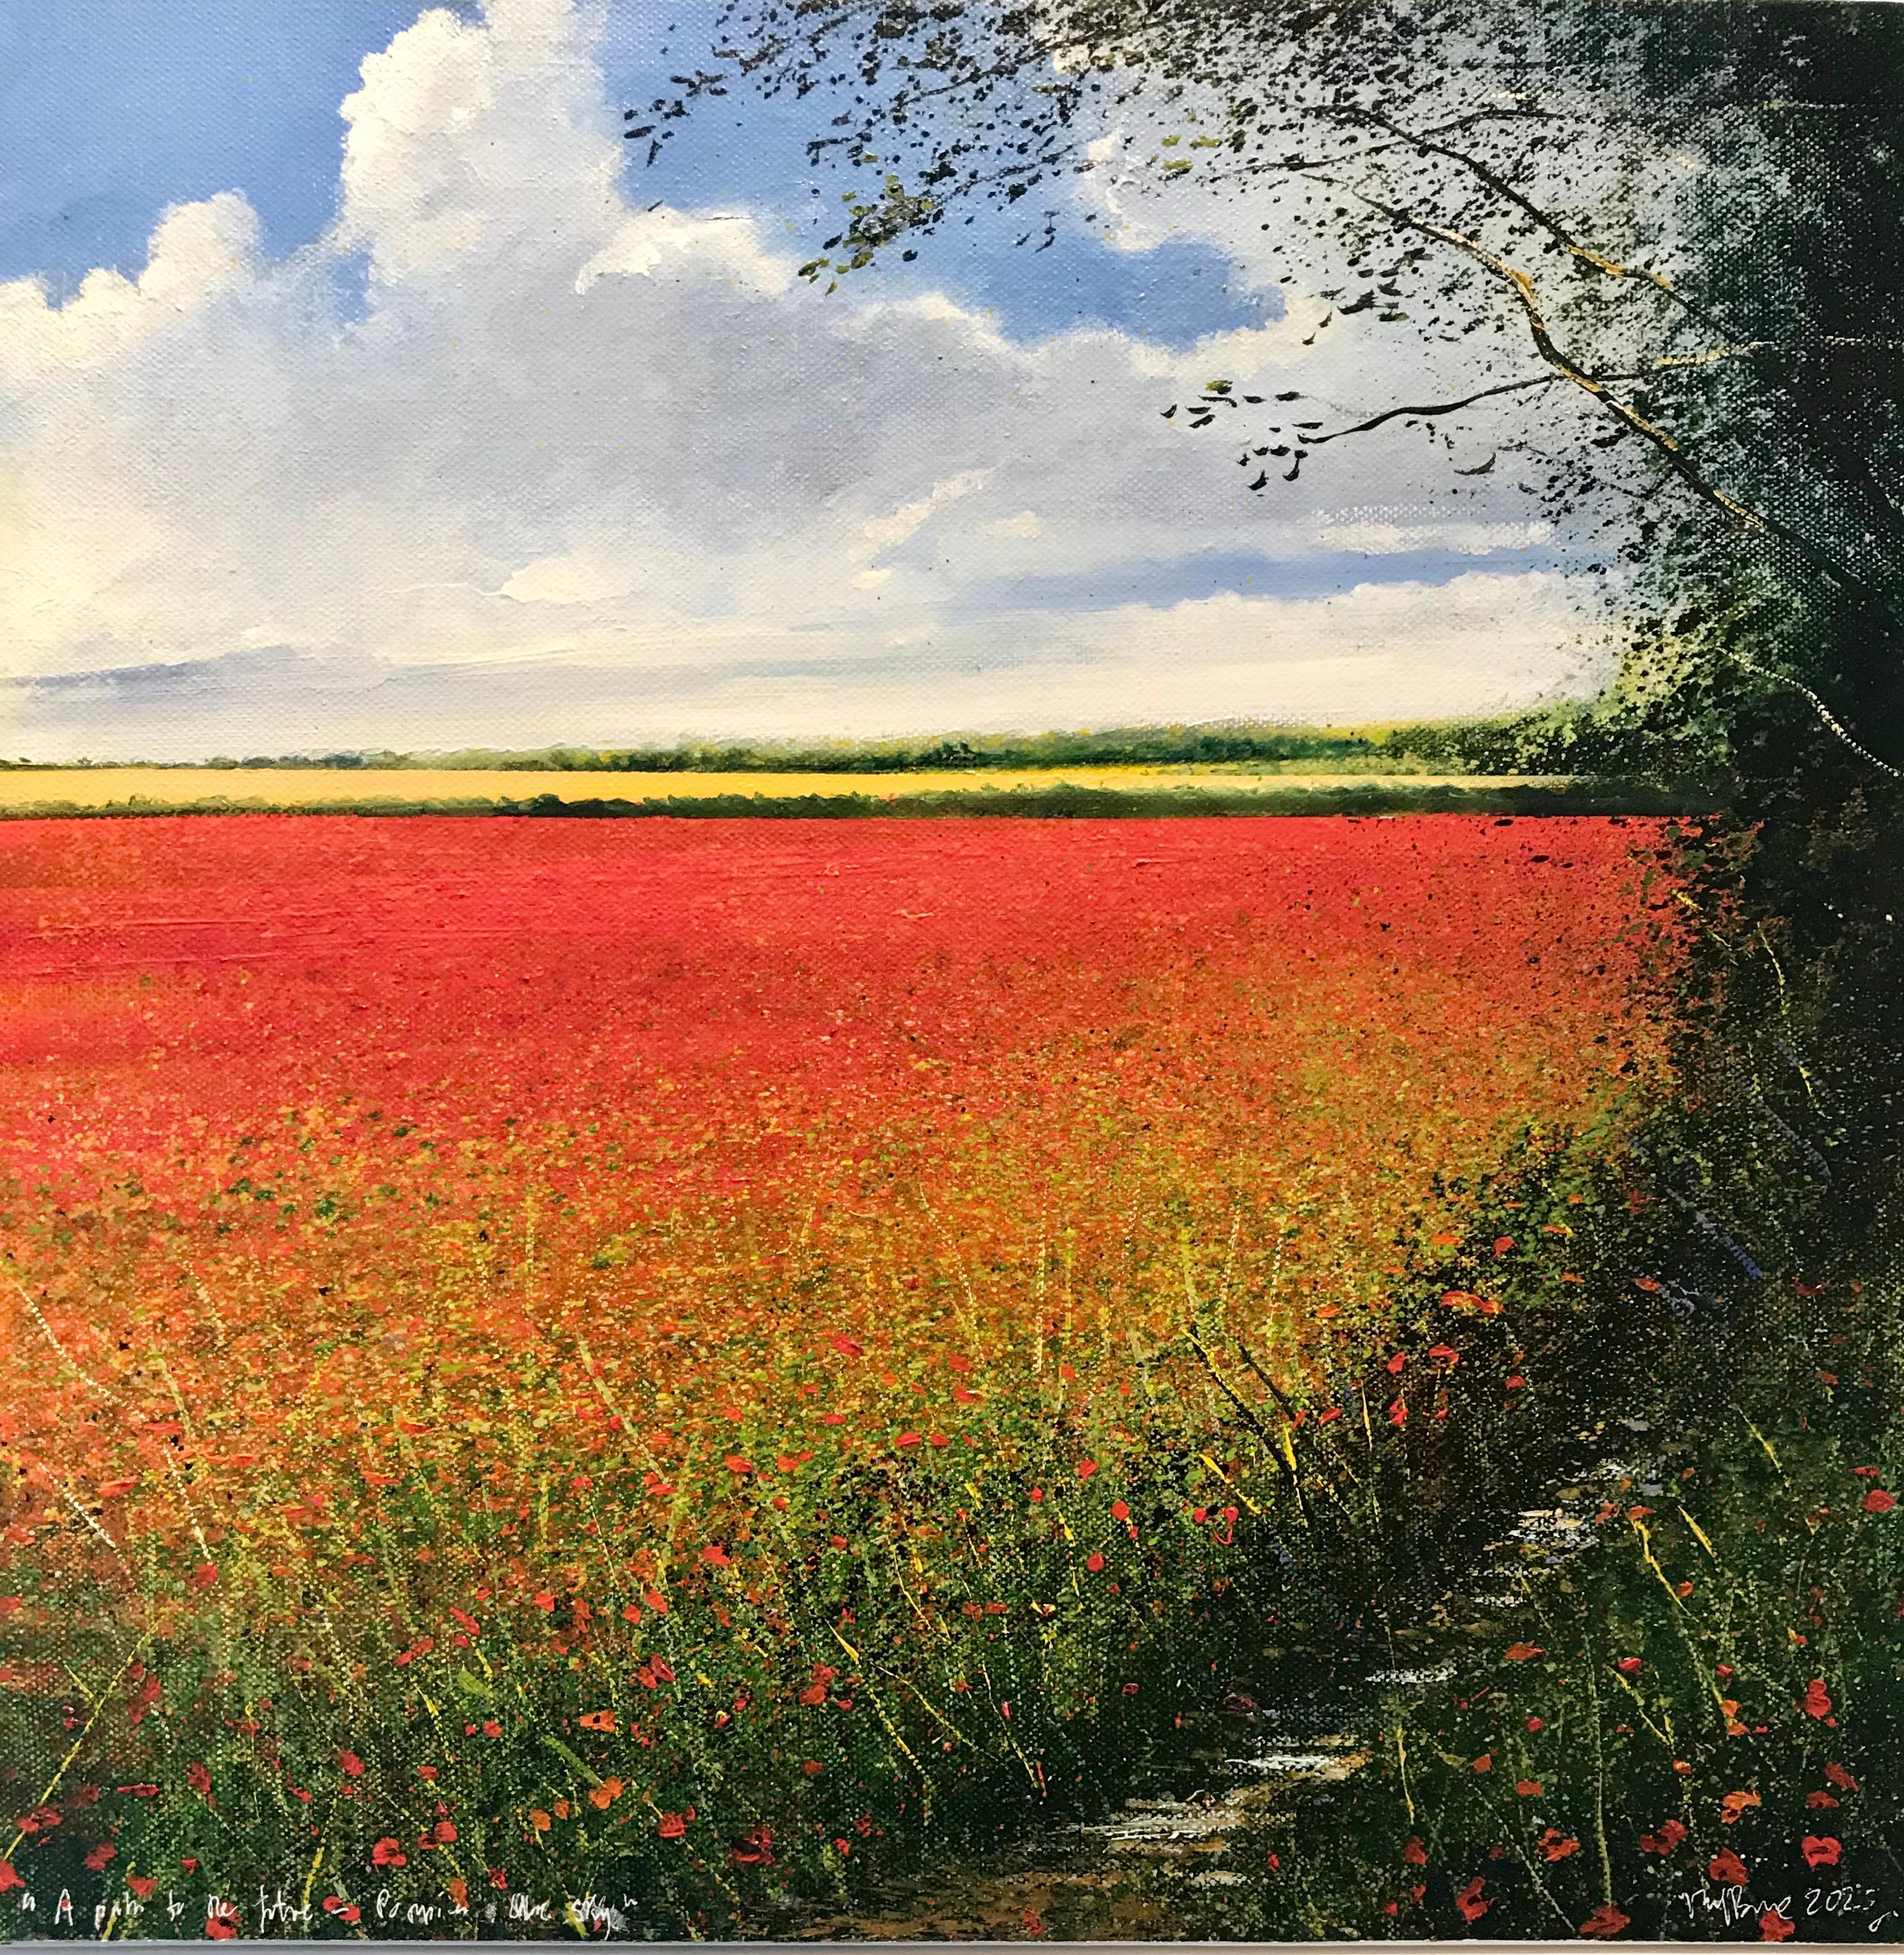 Rory J. Browne Landscape Painting - Poppy Path to the Future - original landscape painting contemporary modern art